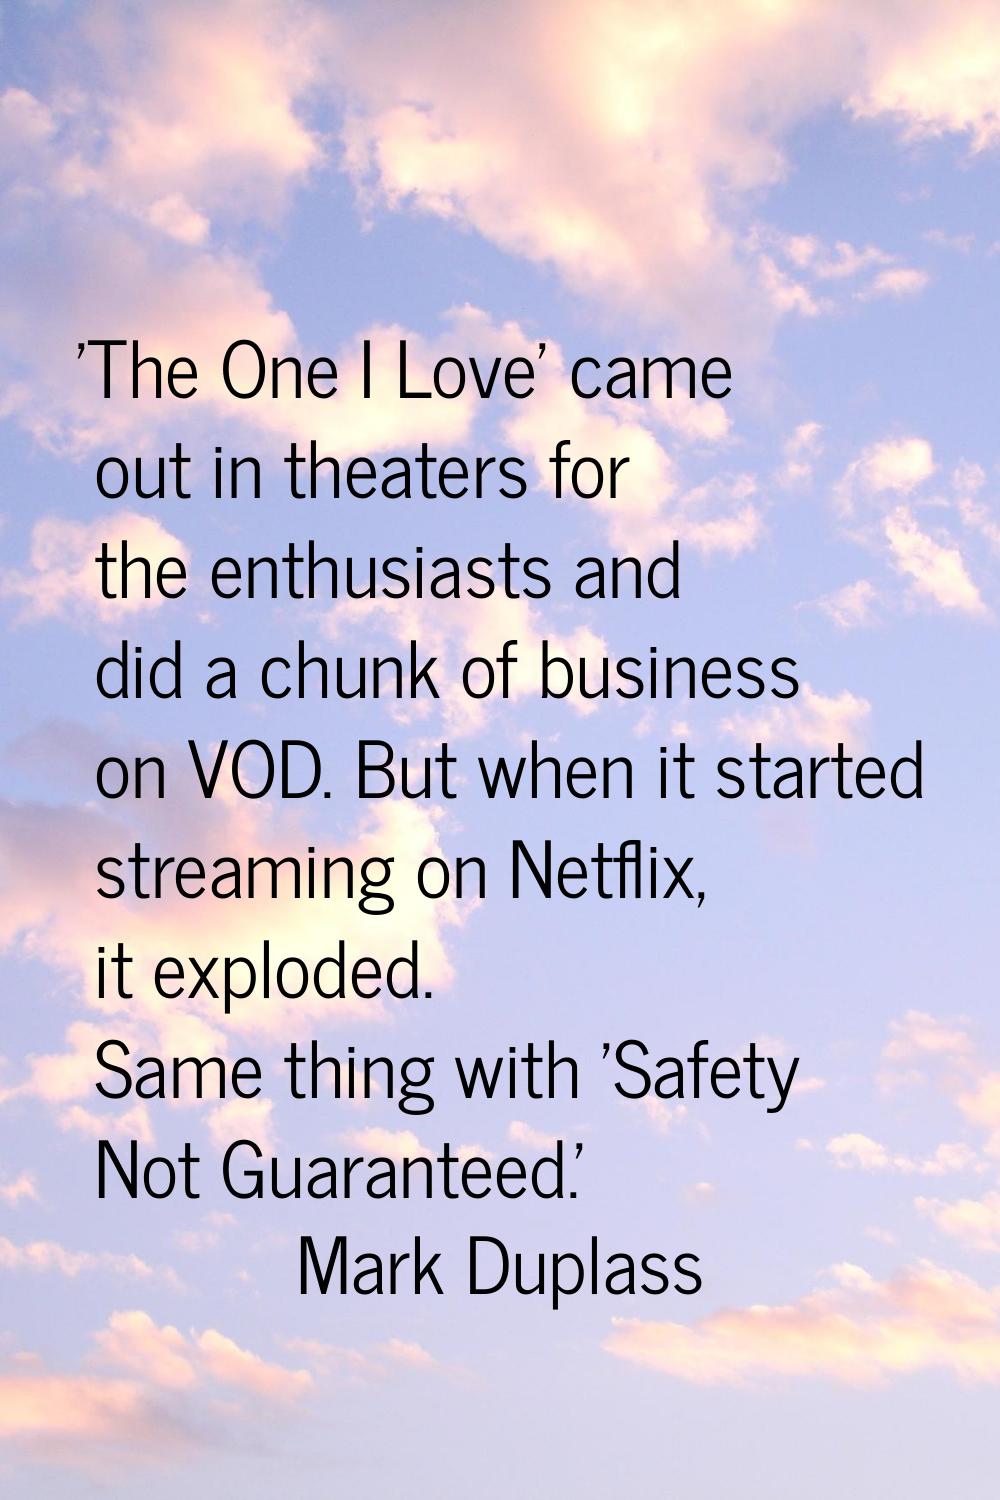 'The One I Love' came out in theaters for the enthusiasts and did a chunk of business on VOD. But w